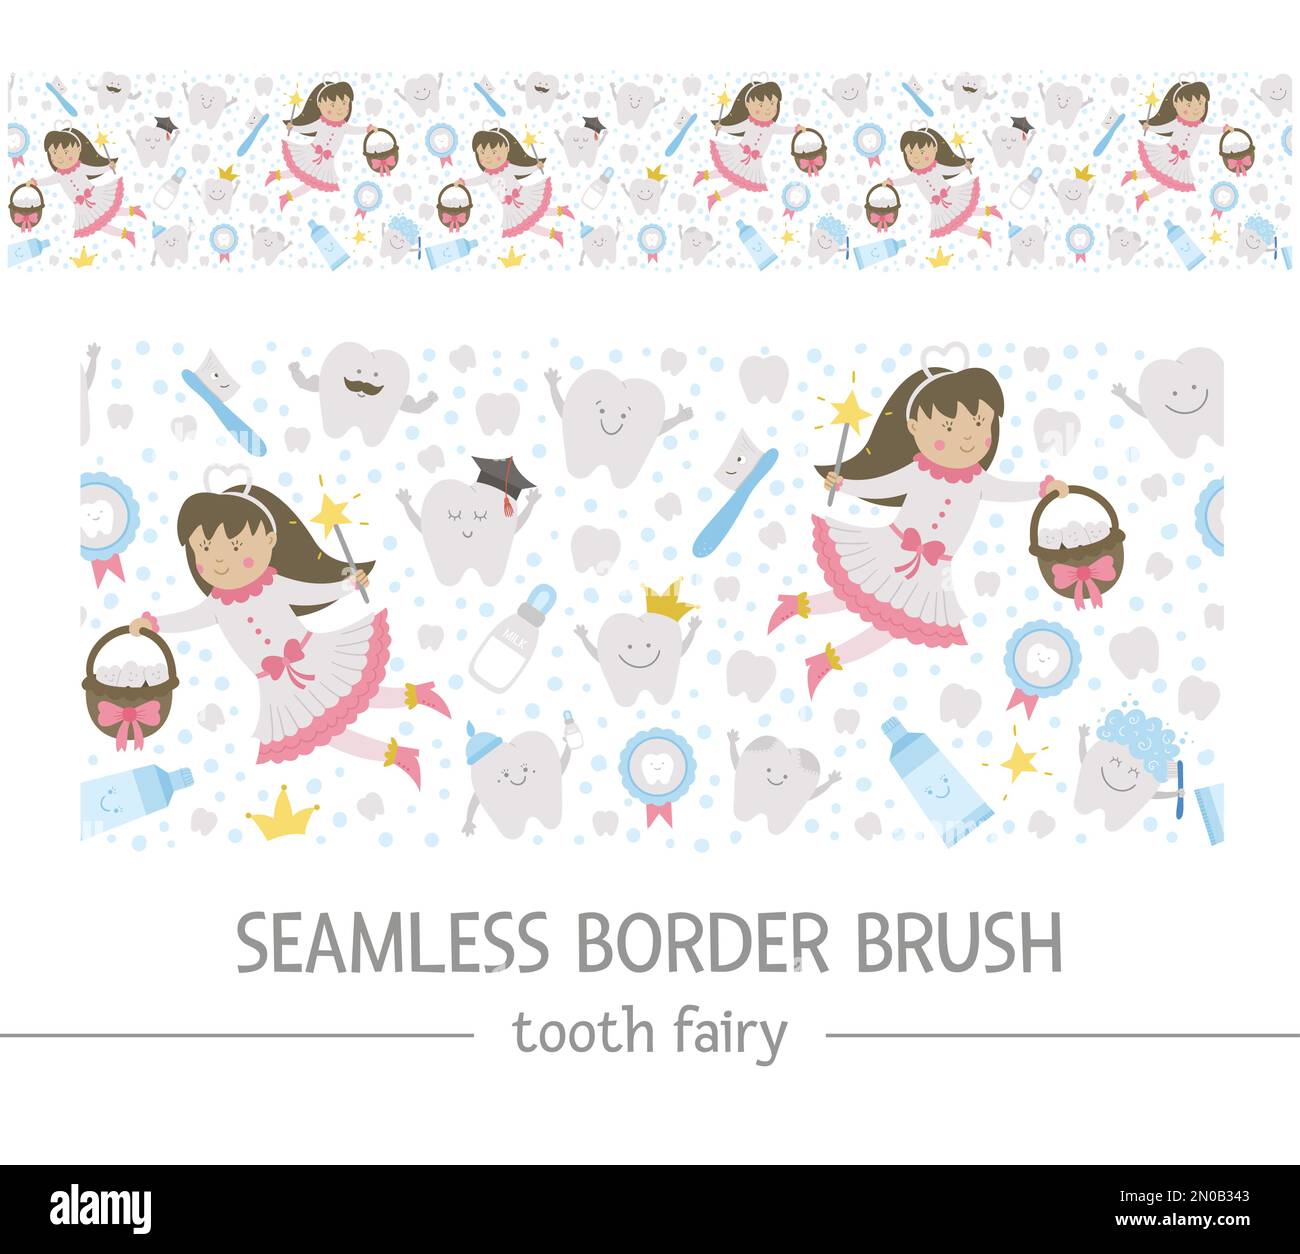 Cute tooth fairy seamless border brush. Kawaii fantasy princess horizontal background with funny smiling toothbrush, baby, molar, toothpaste, teeth. F Stock Vector